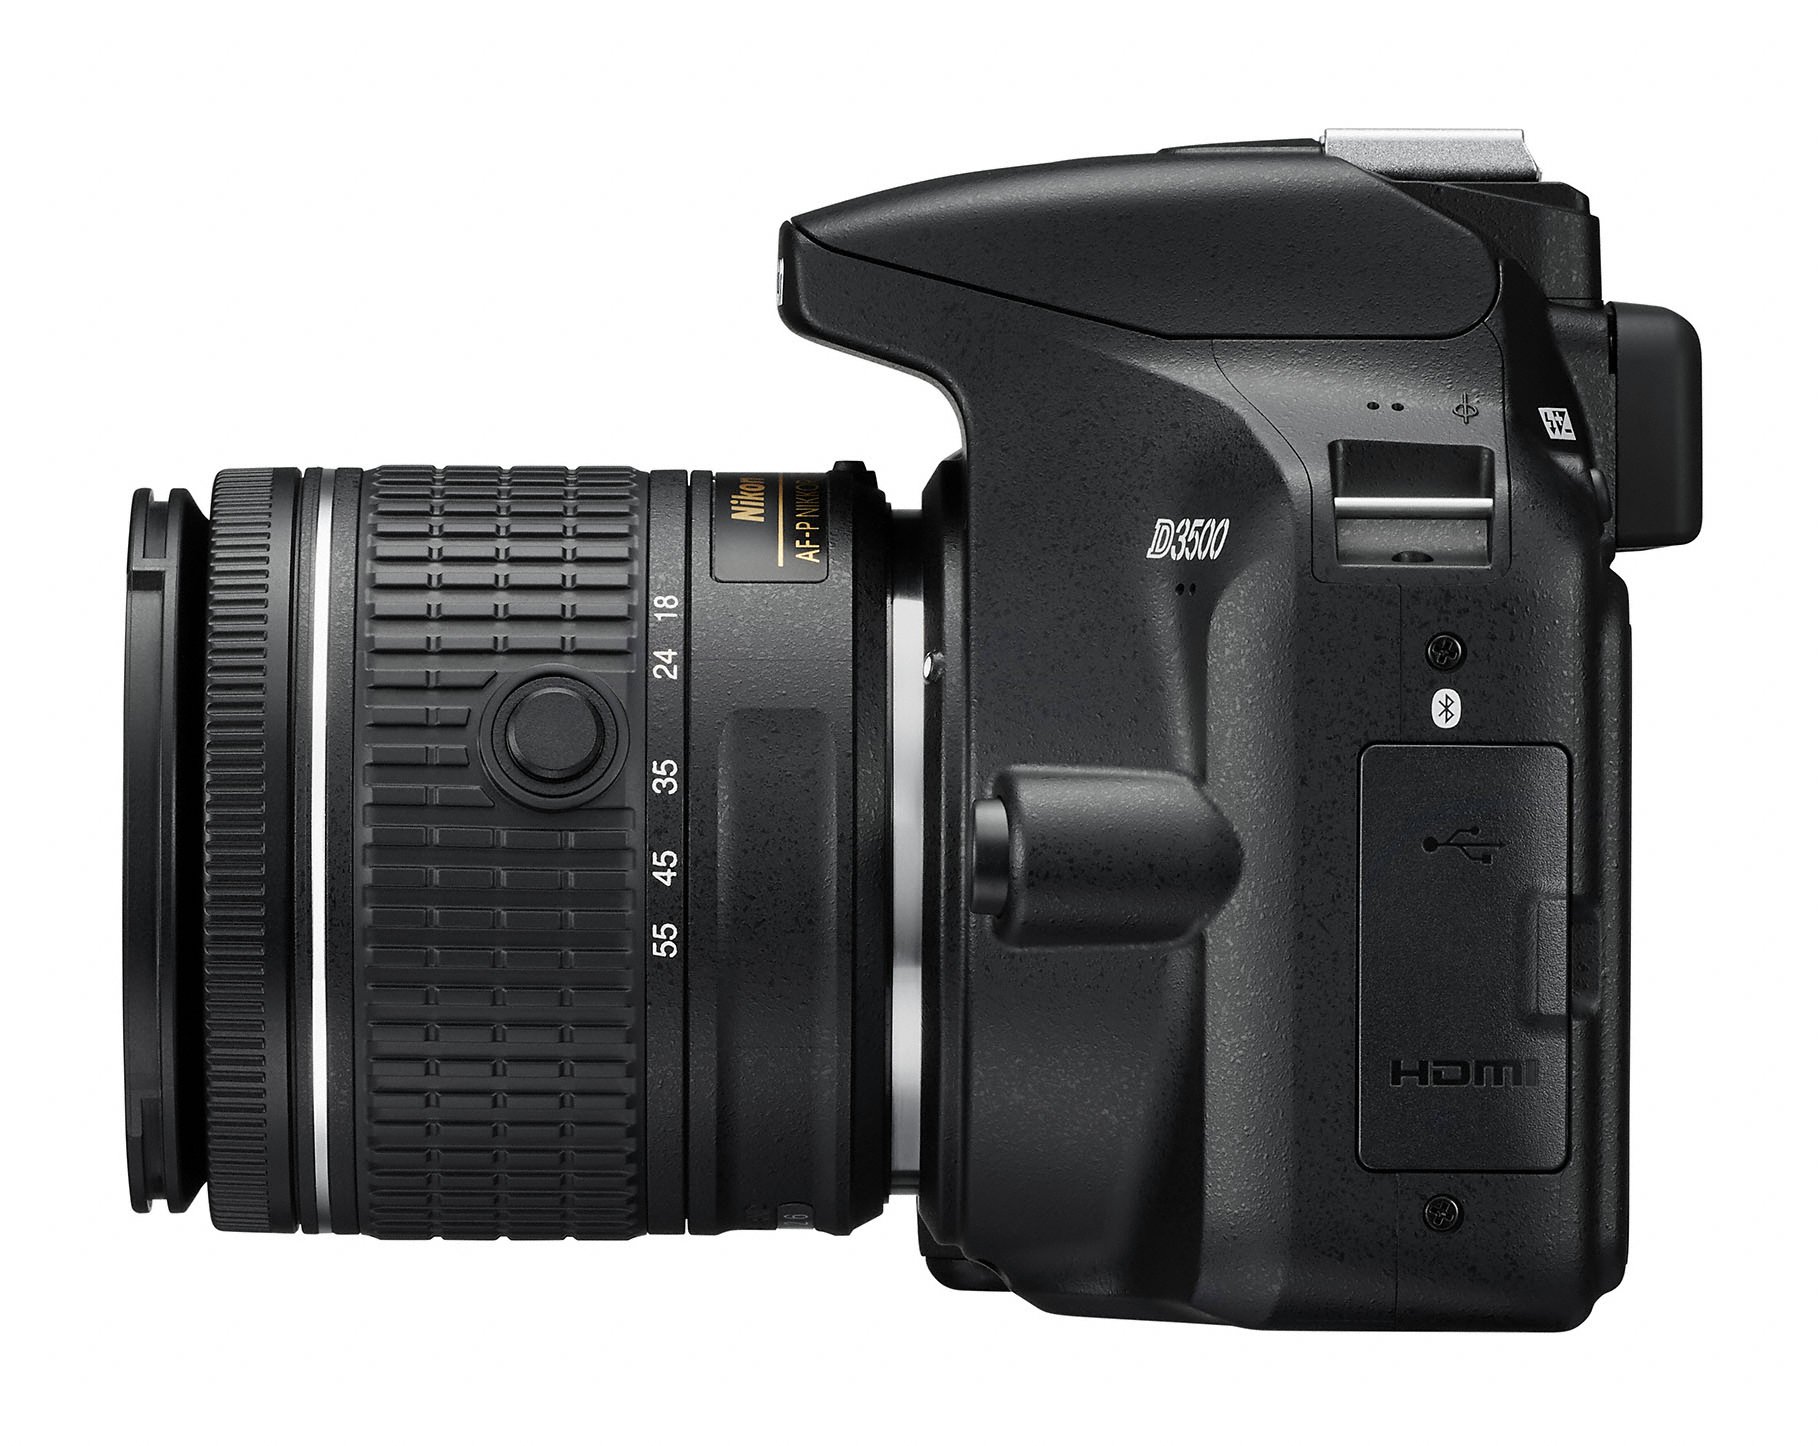 The New Nikon D20 has a Battery Life Rating of 20,20 Shots